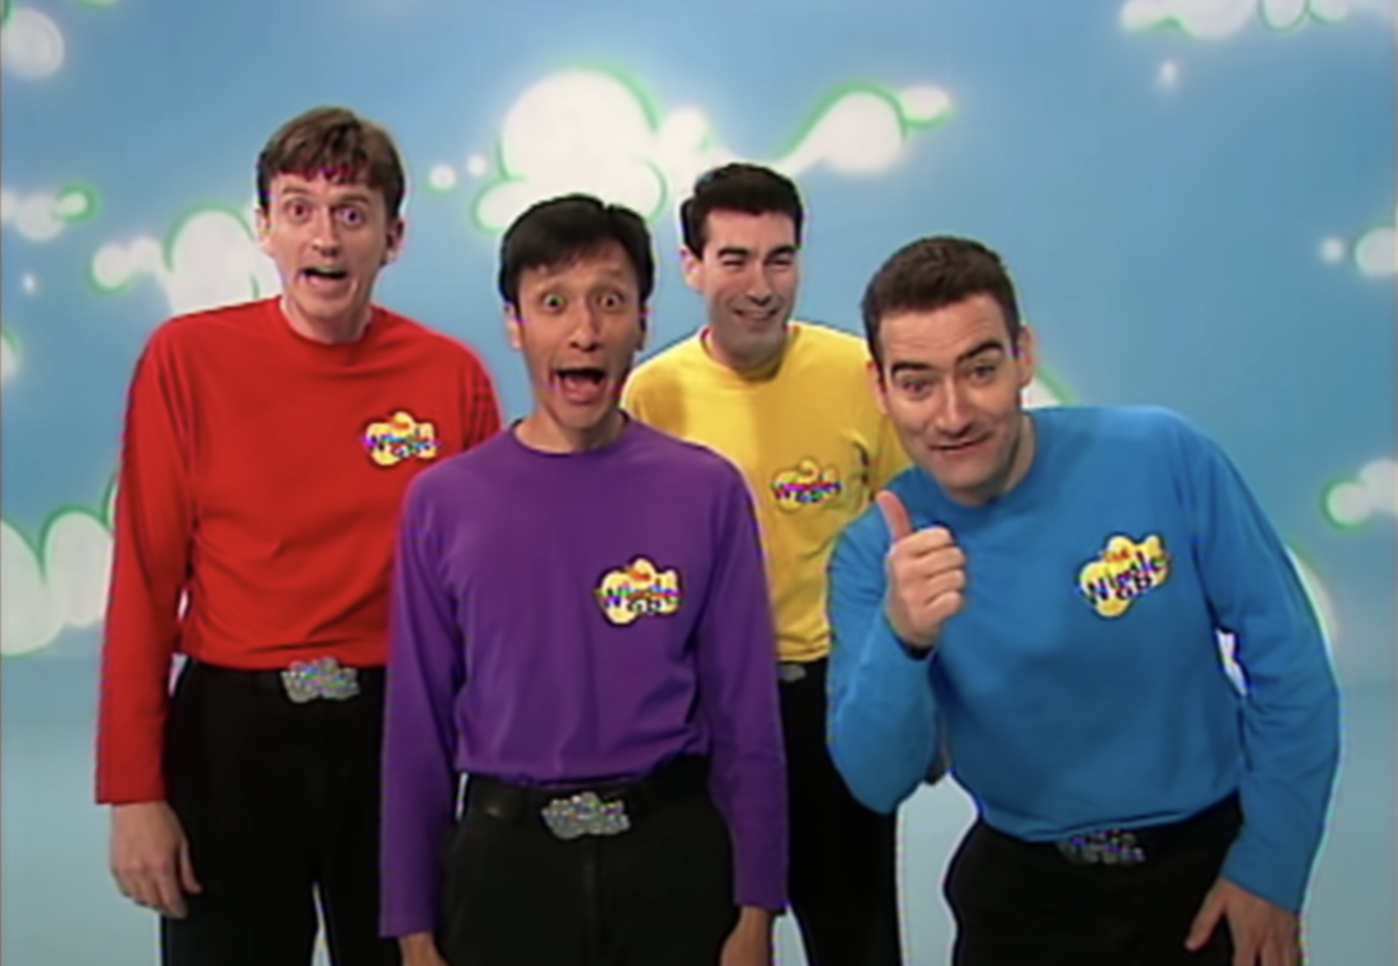 The OG Wiggles crew singing and one of them giving the thumbs up